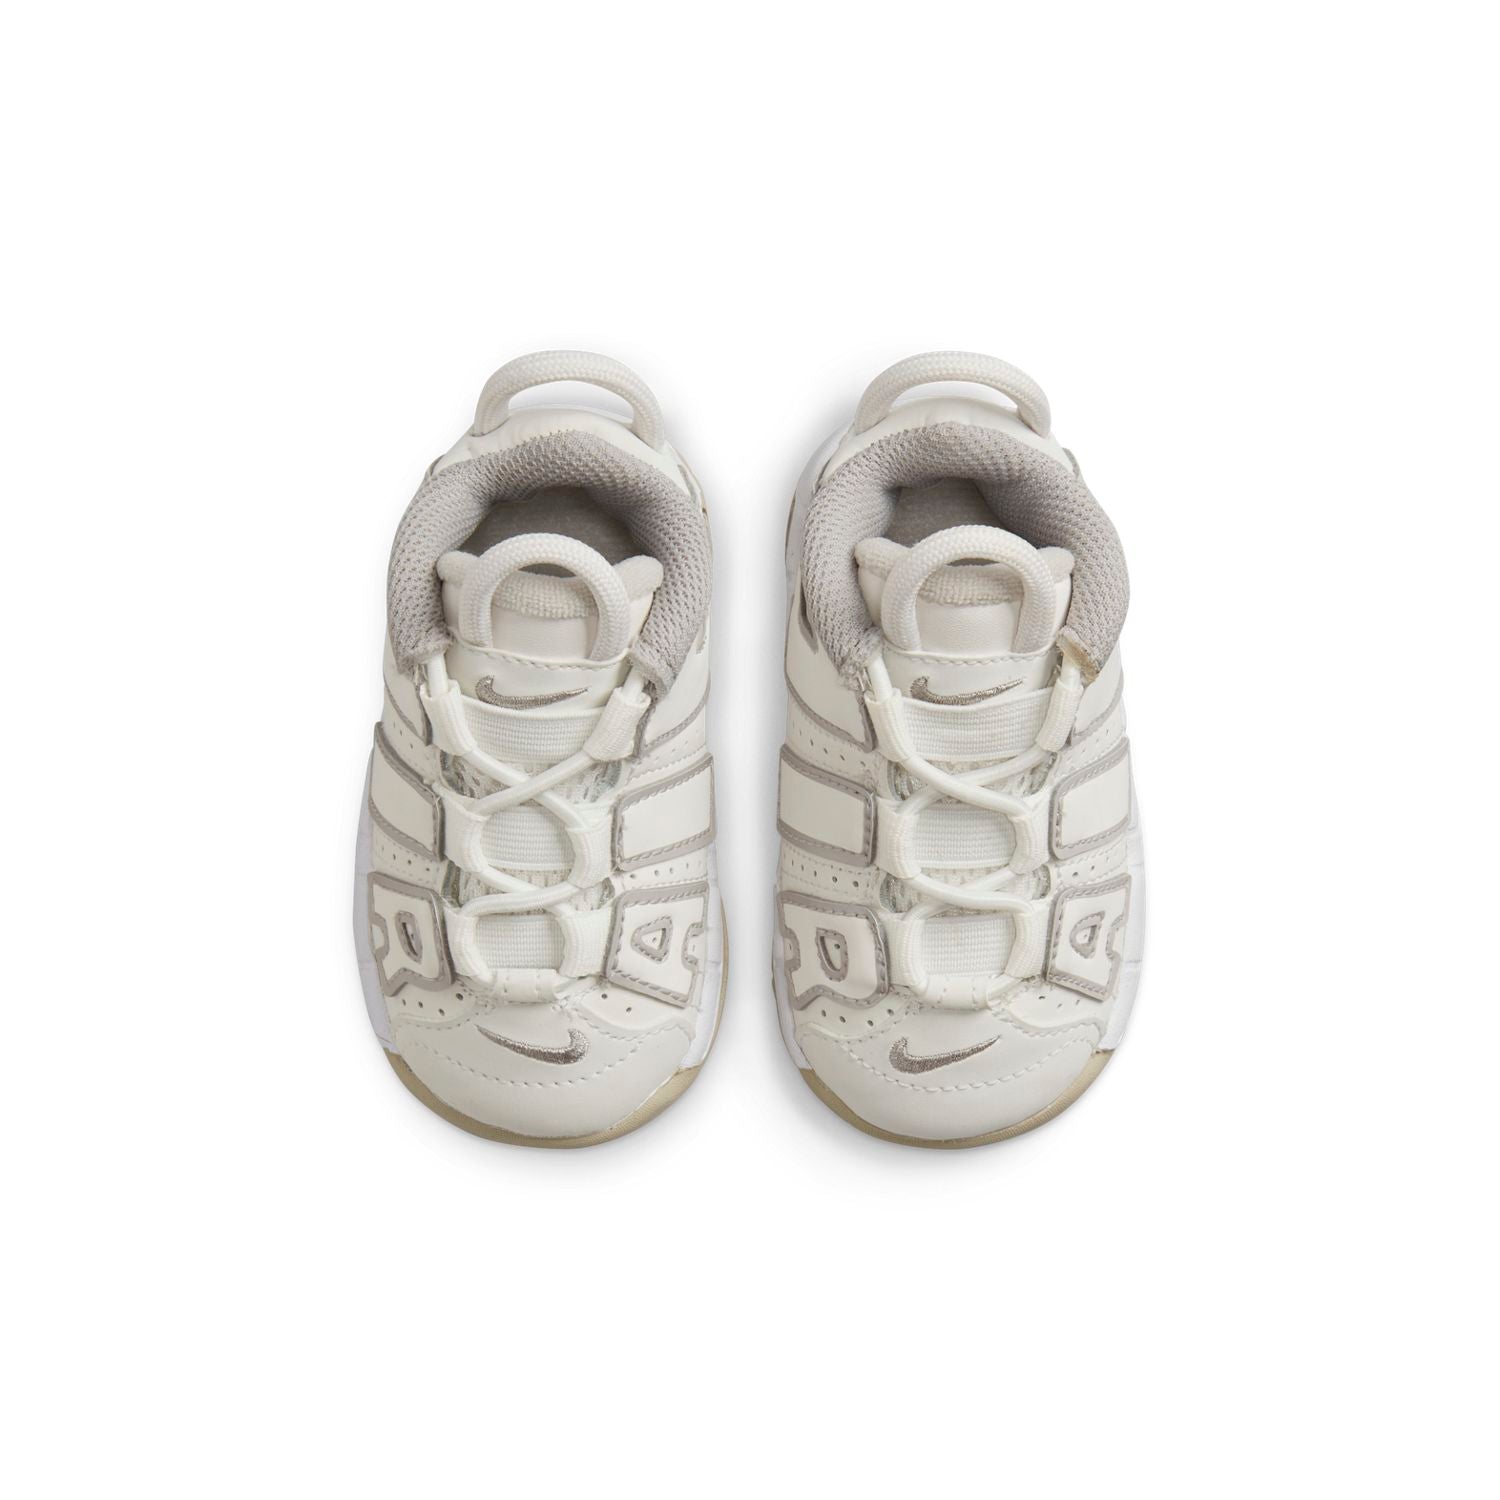 Nike Toddlers Air More Uptempo TD (DM1027-001)